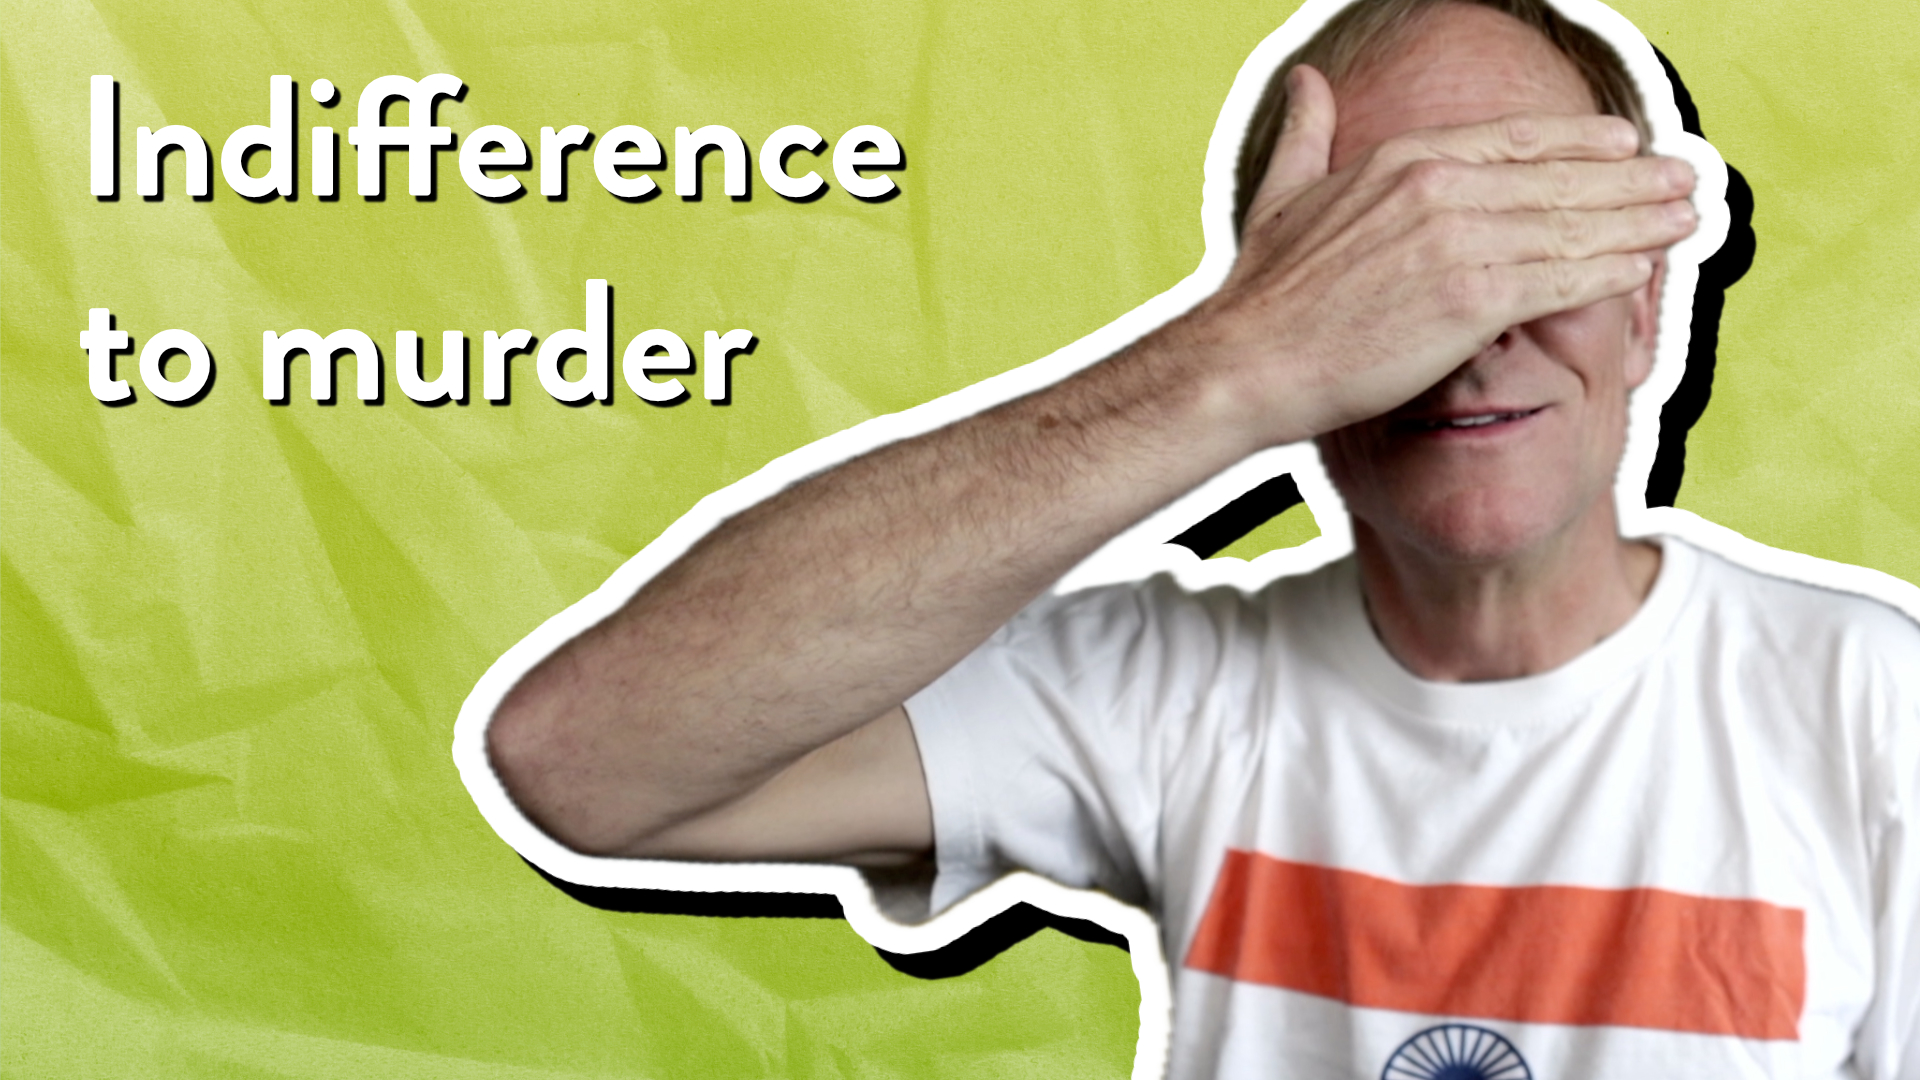 Indifference to murder